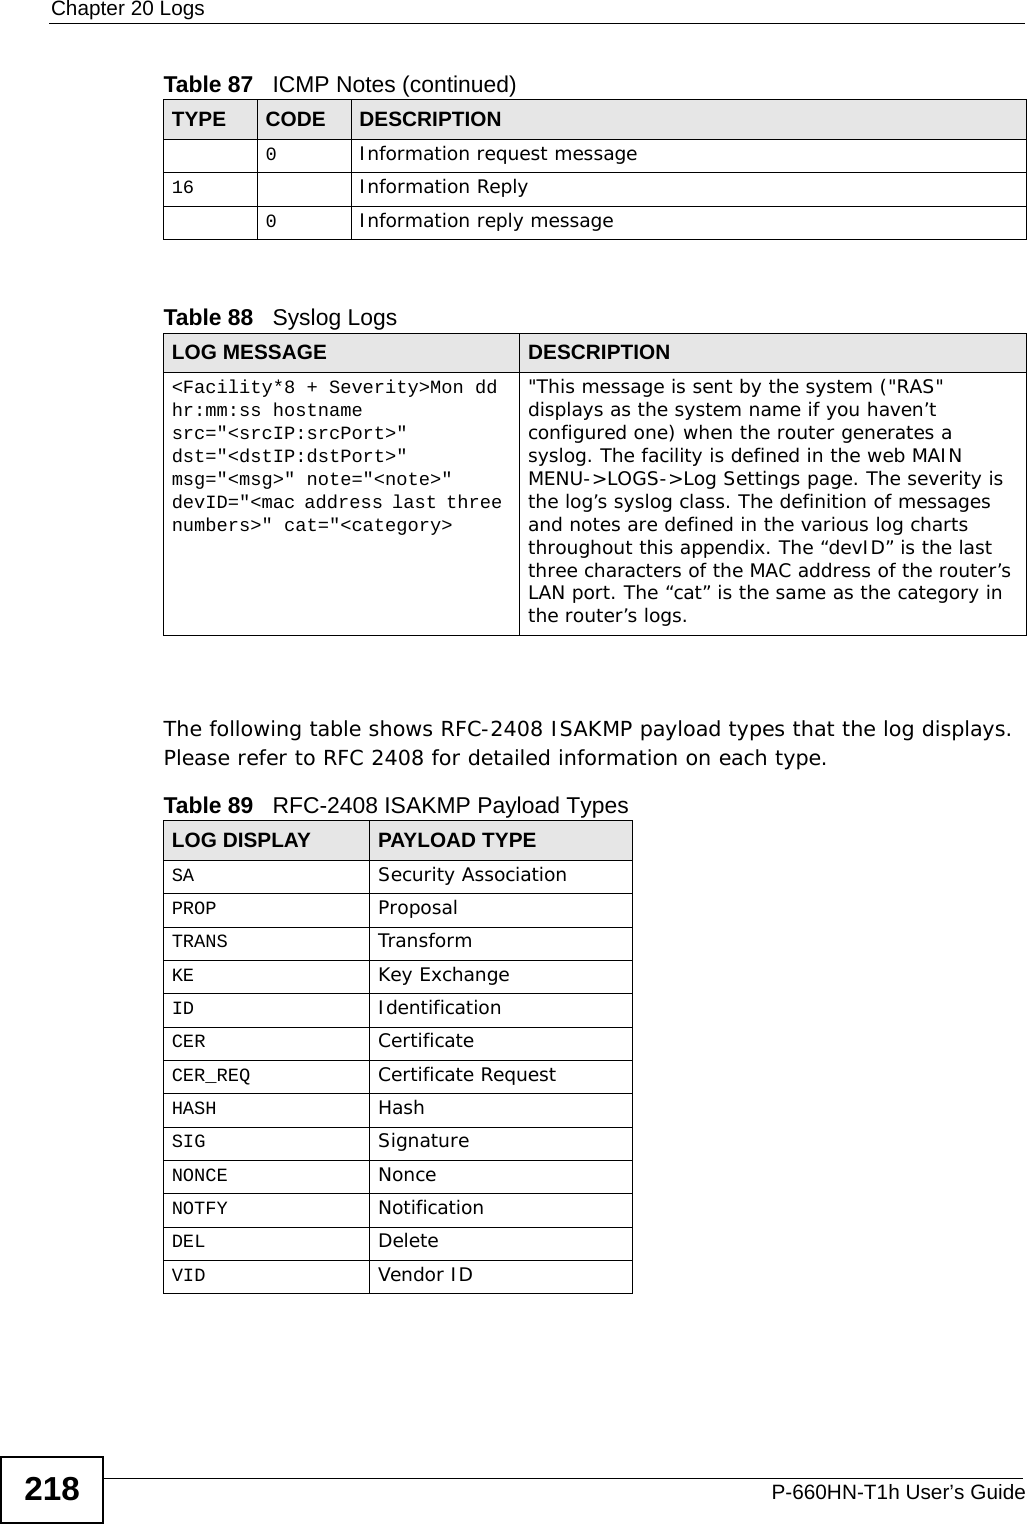 Chapter 20 LogsP-660HN-T1h User’s Guide218 The following table shows RFC-2408 ISAKMP payload types that the log displays. Please refer to RFC 2408 for detailed information on each type. 0Information request message16 Information Reply0Information reply messageTable 88   Syslog LogsLOG MESSAGE DESCRIPTION&lt;Facility*8 + Severity&gt;Mon dd hr:mm:ss hostname src=&quot;&lt;srcIP:srcPort&gt;&quot; dst=&quot;&lt;dstIP:dstPort&gt;&quot; msg=&quot;&lt;msg&gt;&quot; note=&quot;&lt;note&gt;&quot; devID=&quot;&lt;mac address last three numbers&gt;&quot; cat=&quot;&lt;category&gt;&quot;This message is sent by the system (&quot;RAS&quot; displays as the system name if you haven’t configured one) when the router generates a syslog. The facility is defined in the web MAIN MENU-&gt;LOGS-&gt;Log Settings page. The severity is the log’s syslog class. The definition of messages and notes are defined in the various log charts throughout this appendix. The “devID” is the last three characters of the MAC address of the router’s LAN port. The “cat” is the same as the category in the router’s logs.Table 89   RFC-2408 ISAKMP Payload TypesLOG DISPLAY PAYLOAD TYPESA Security AssociationPROP ProposalTRANS TransformKE Key ExchangeID IdentificationCER CertificateCER_REQ Certificate RequestHASH HashSIG SignatureNONCE NonceNOTFY NotificationDEL DeleteVID Vendor IDTable 87   ICMP Notes (continued)TYPE CODE DESCRIPTION